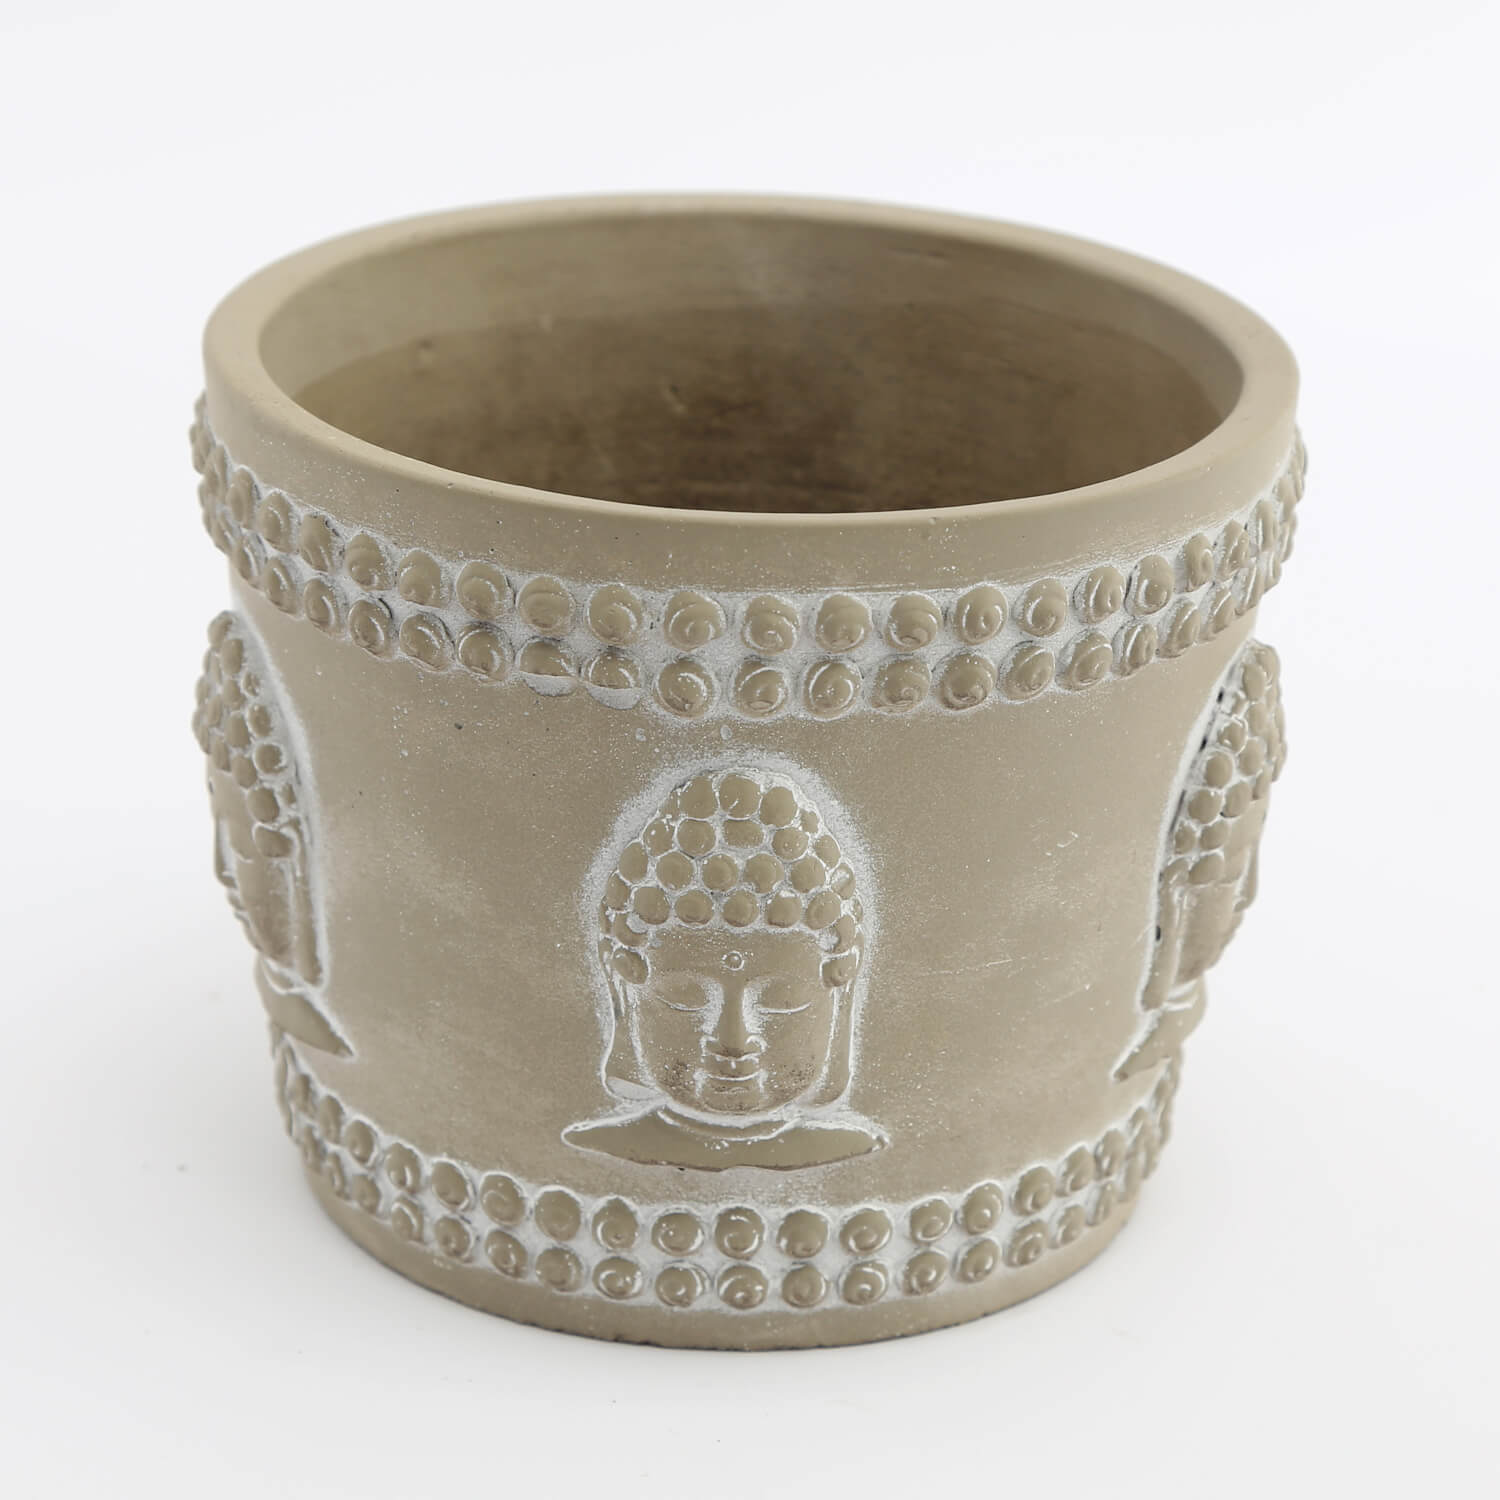 The Home Buddah Planter - 14cm - Grey 1 Shaws Department Stores